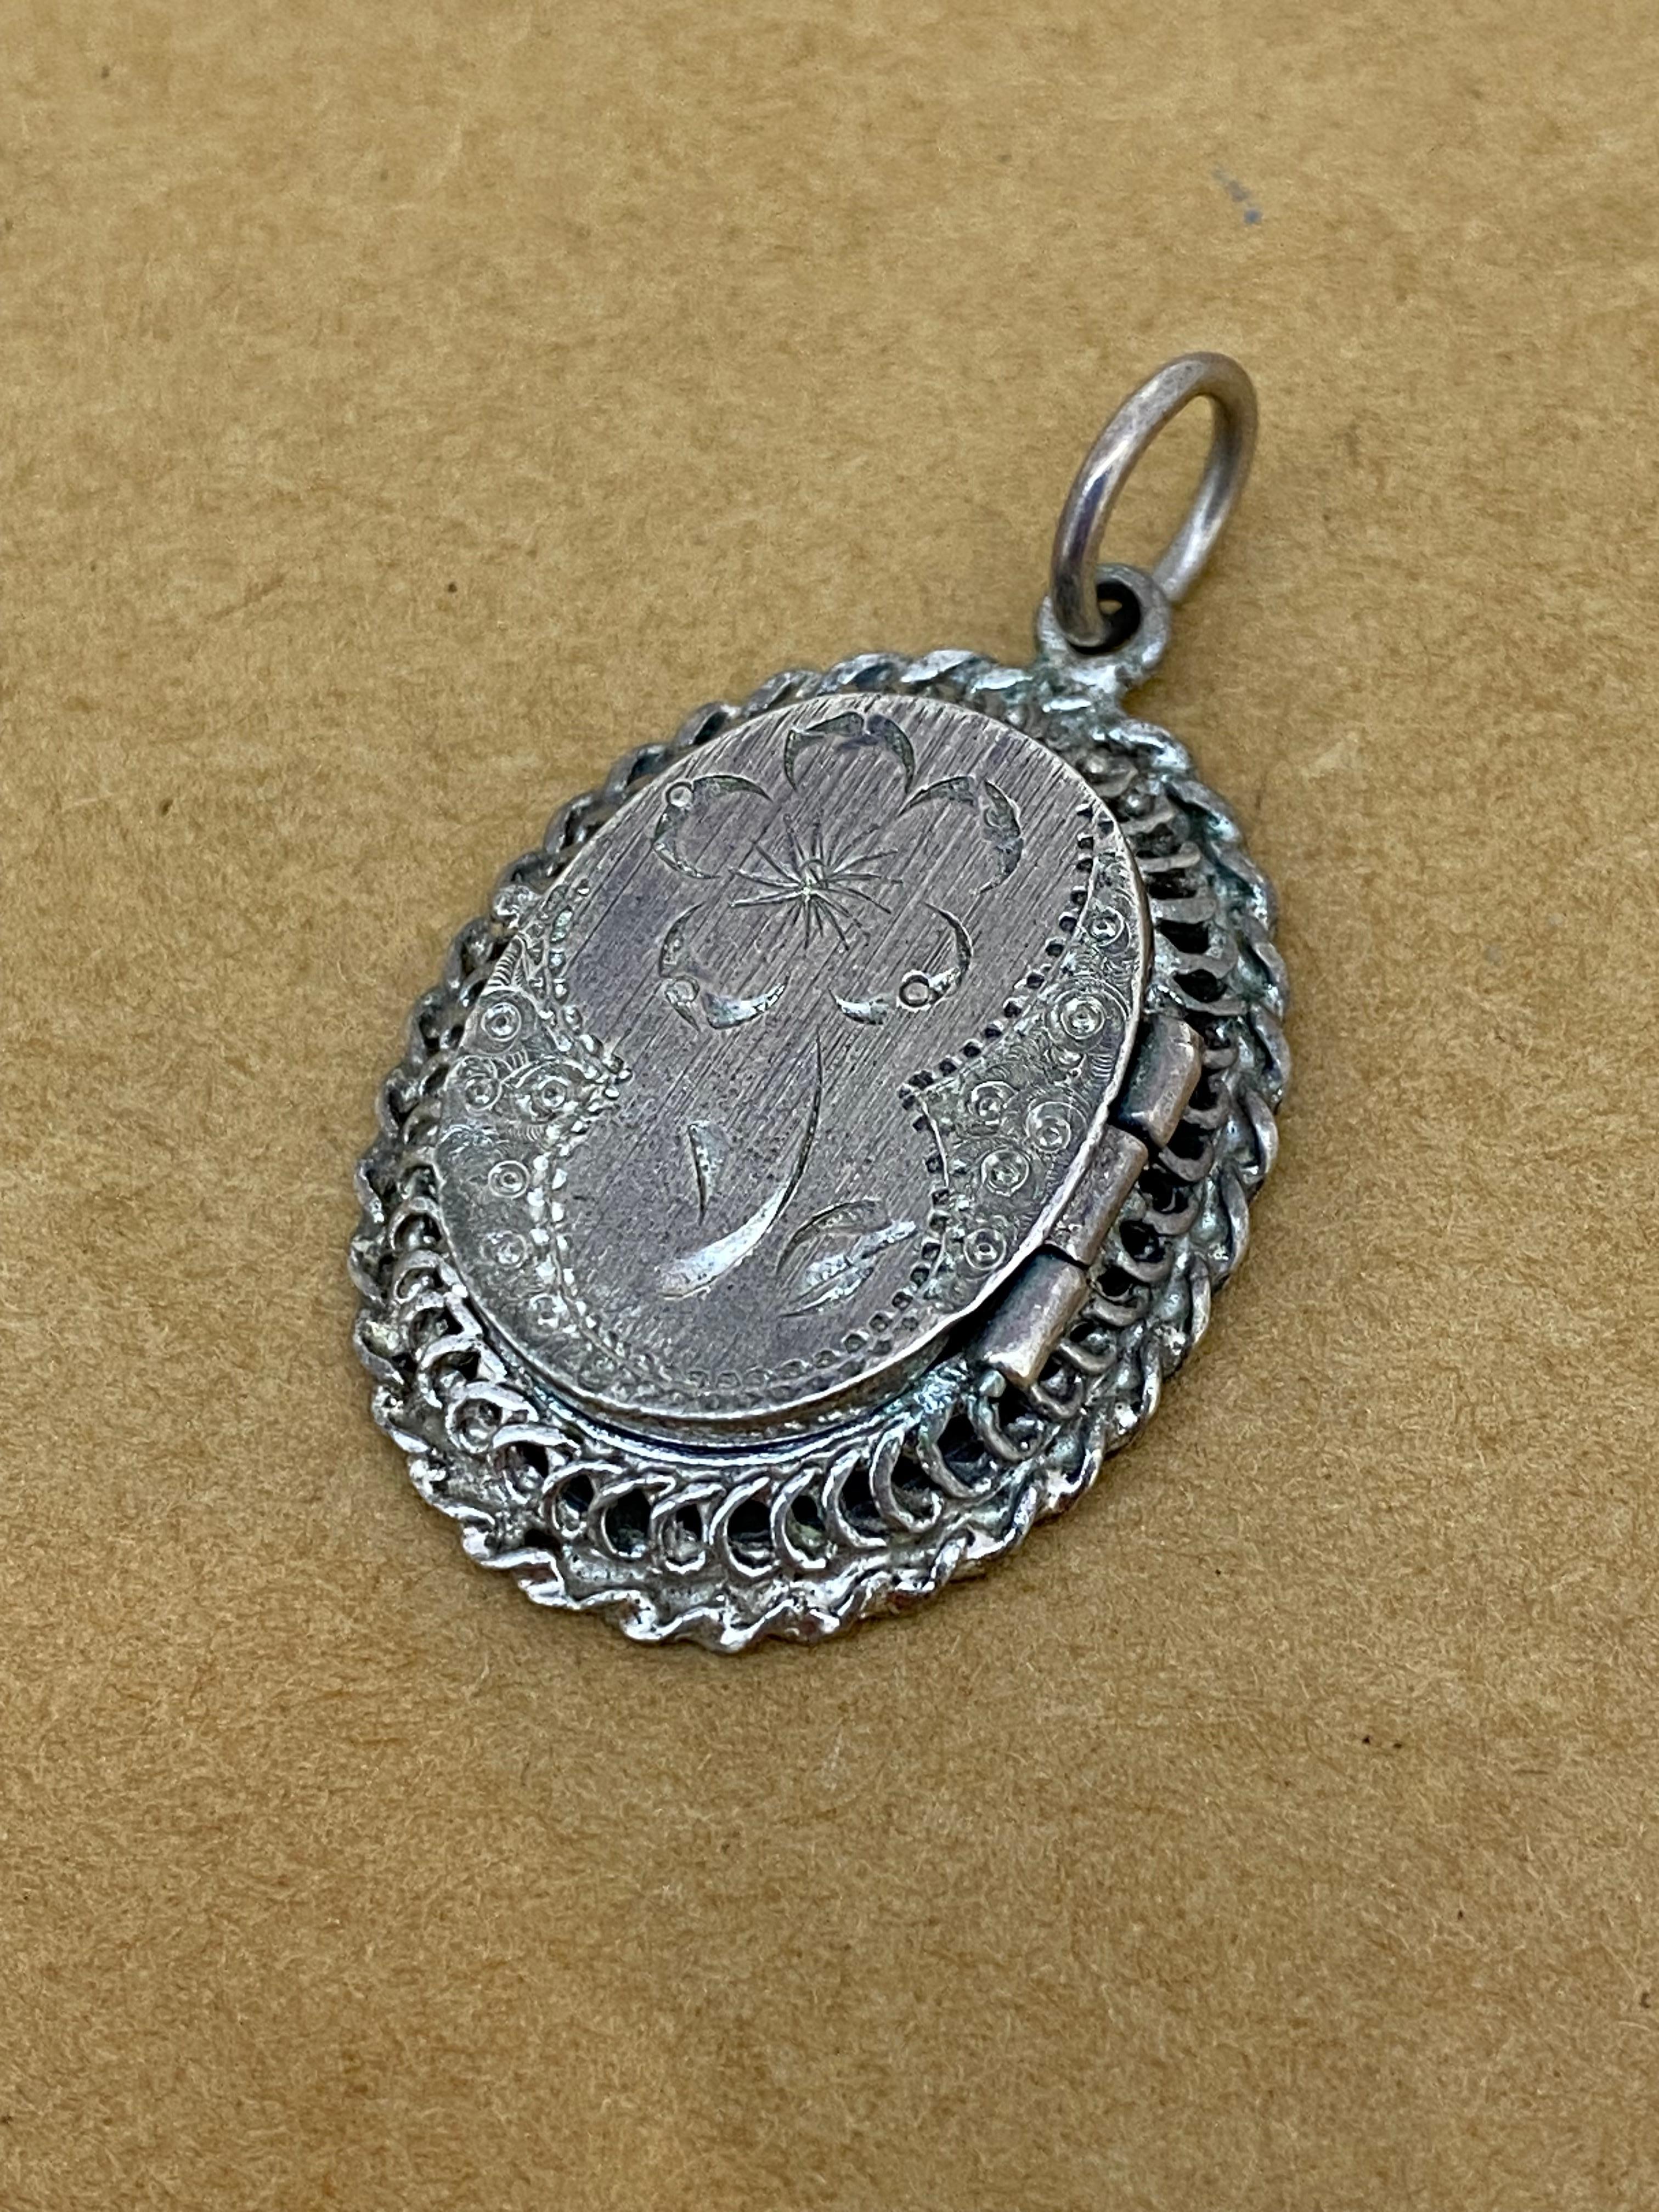 This Finely Engraved Vintage Oval Locket is hinged, 

opening up to reveal a photo compartment, 

that measures 18mm x 14mm

 

This intricate piece is in amazing condition, 

Meticulously crafted in 925 Sterling Silver  

 

With ornate beautifully